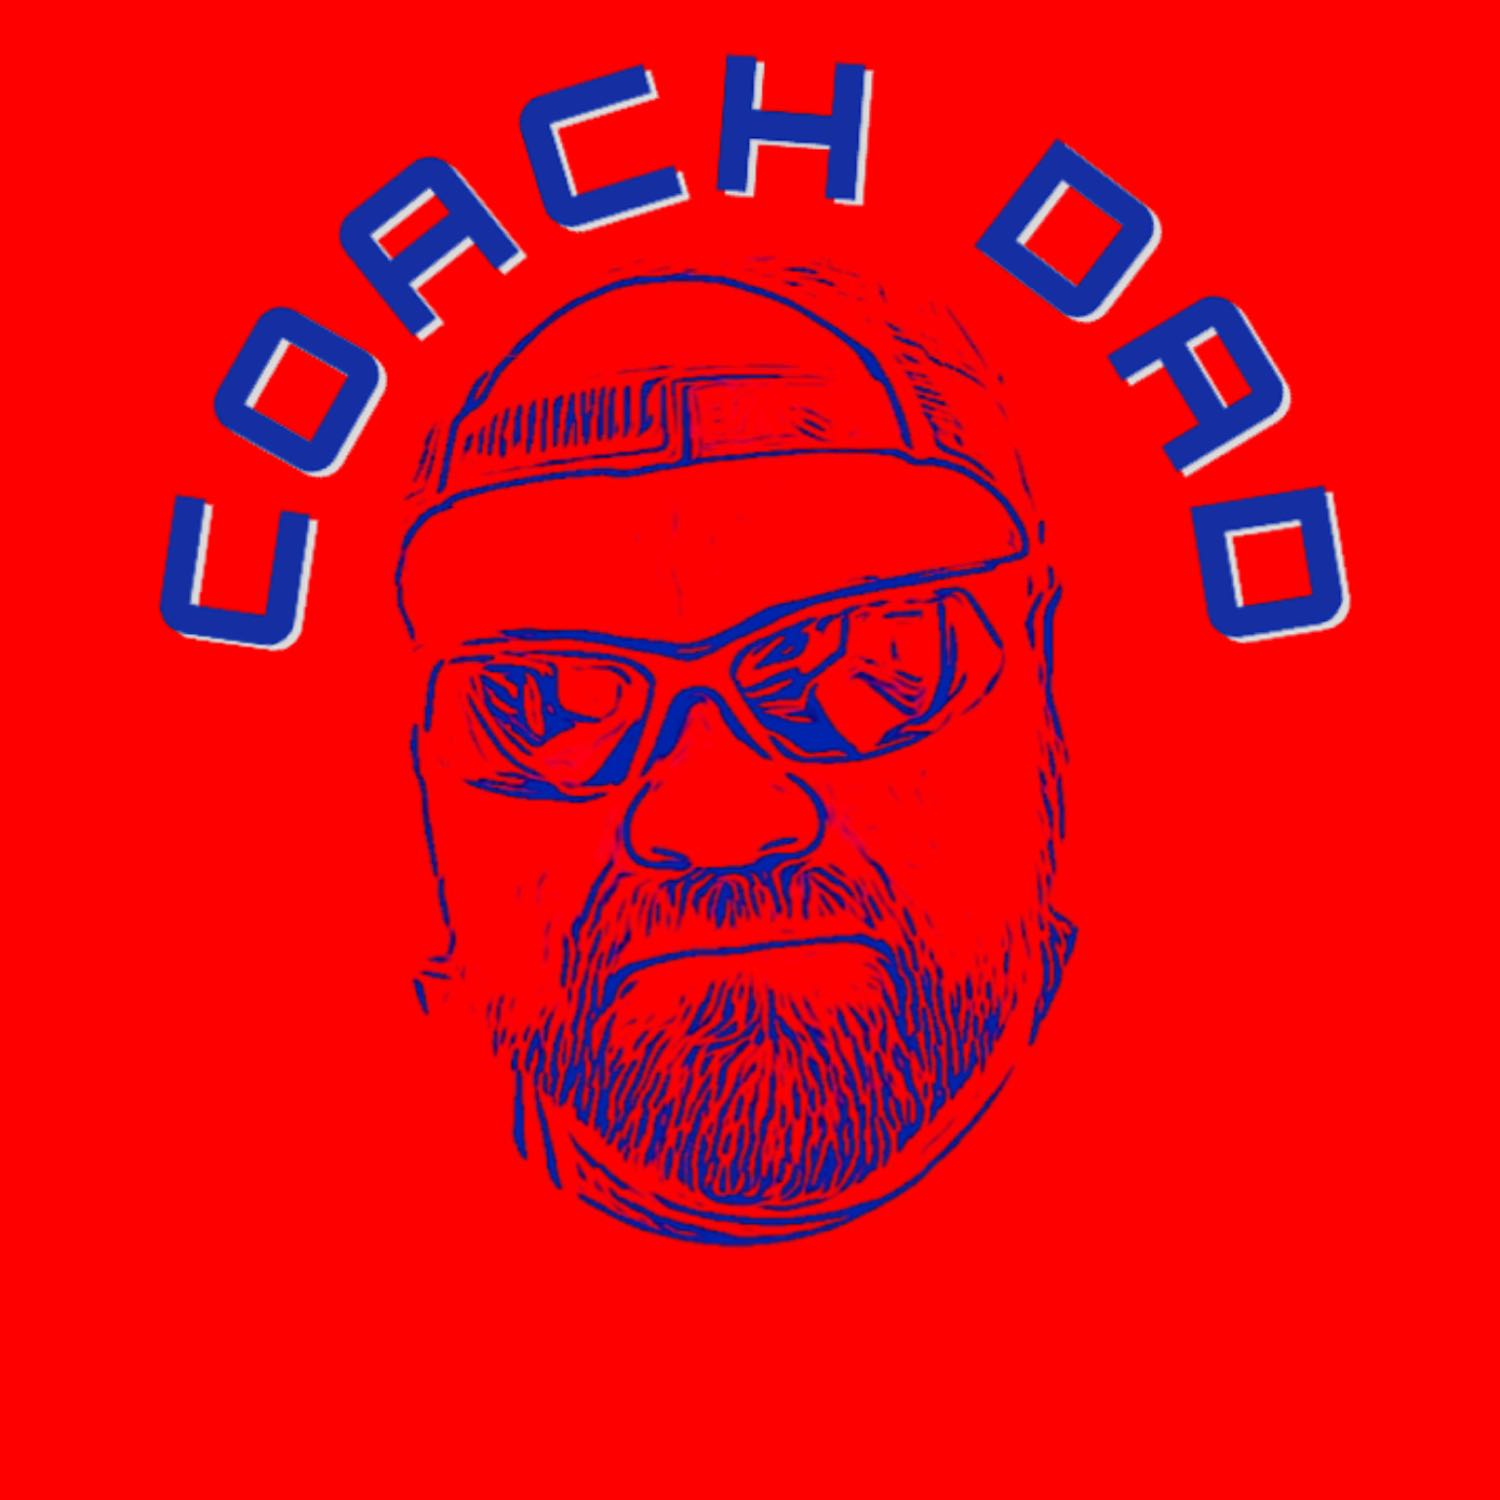 Coach Dad: How can you be Coach AND Dad?